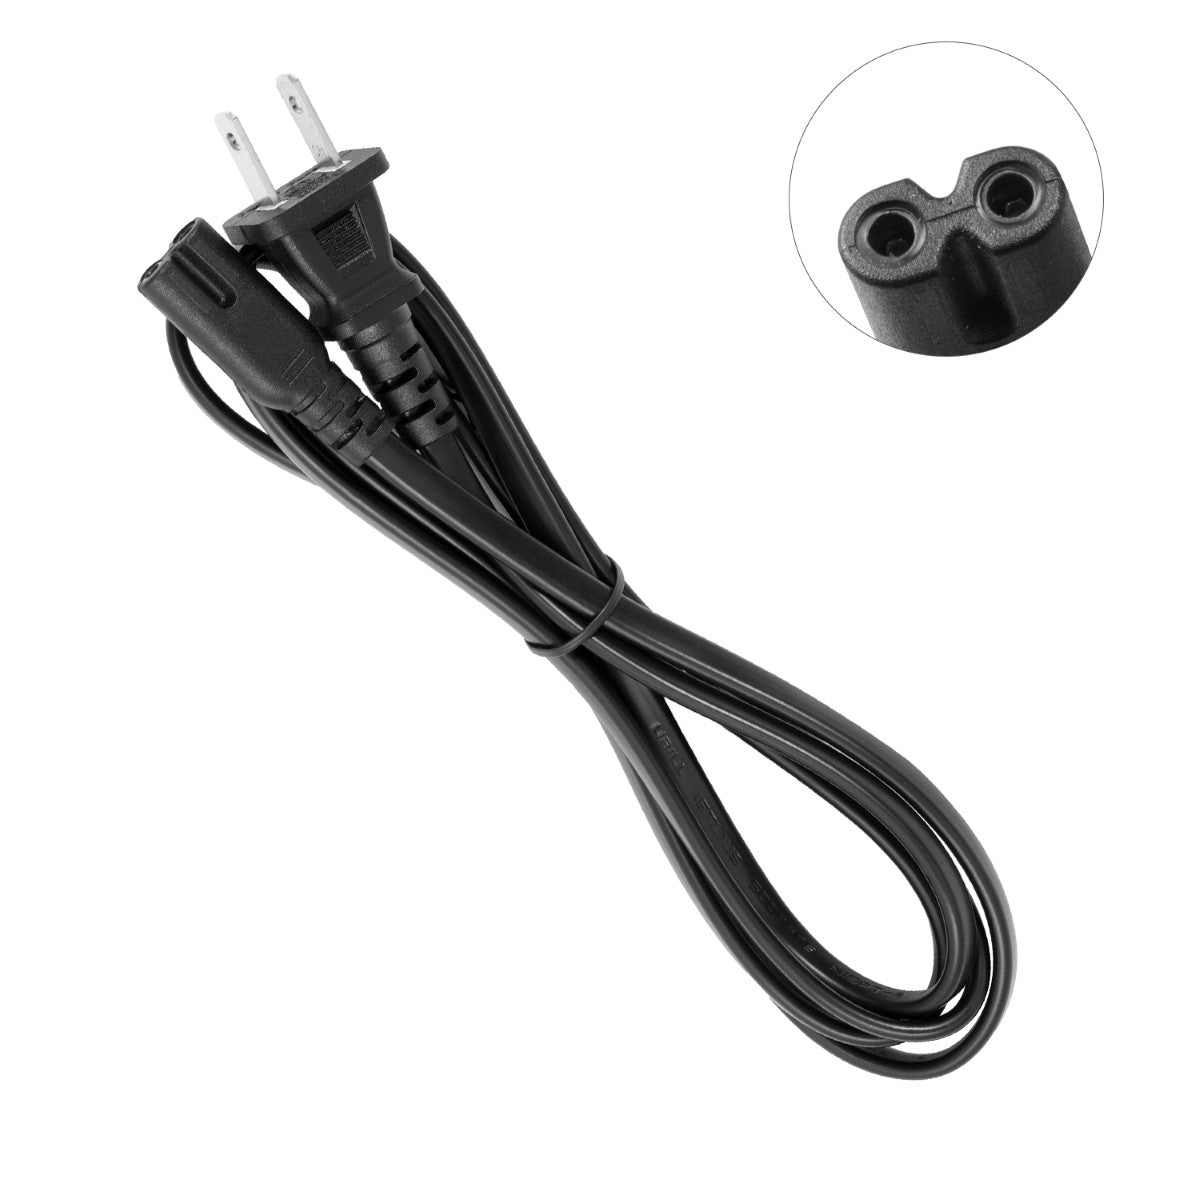 Power Cable for HP DeskJet 3720 All-in-One Printer.